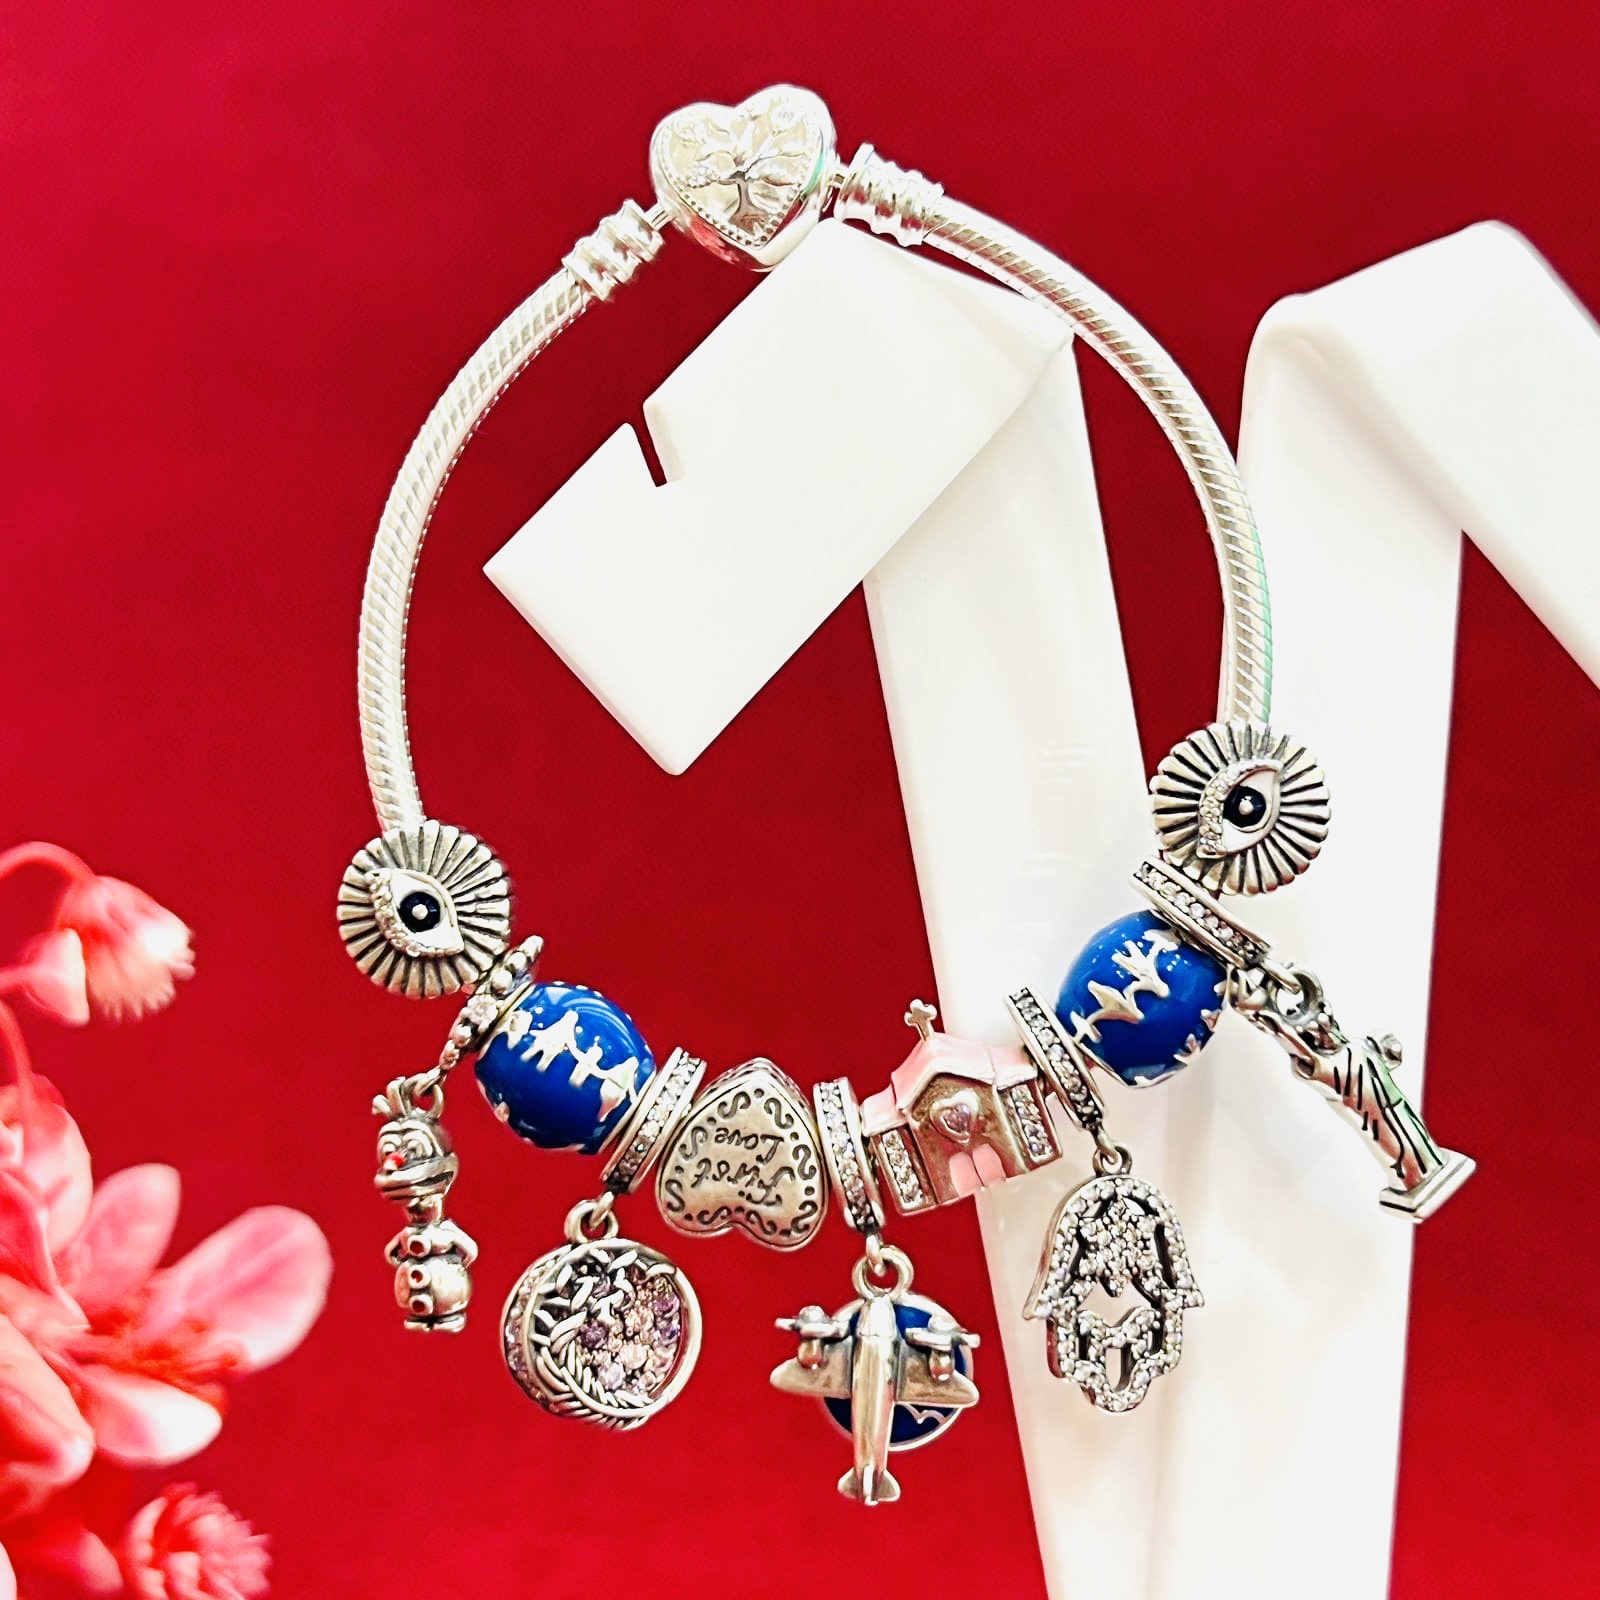 Costco Canada Deals: $129.97 for Pandora Bracelet with 3 Charms - Canadian  Freebies, Coupons, Deals, Bargains, Flyers, Contests Canada Canadian  Freebies, Coupons, Deals, Bargains, Flyers, Contests Canada